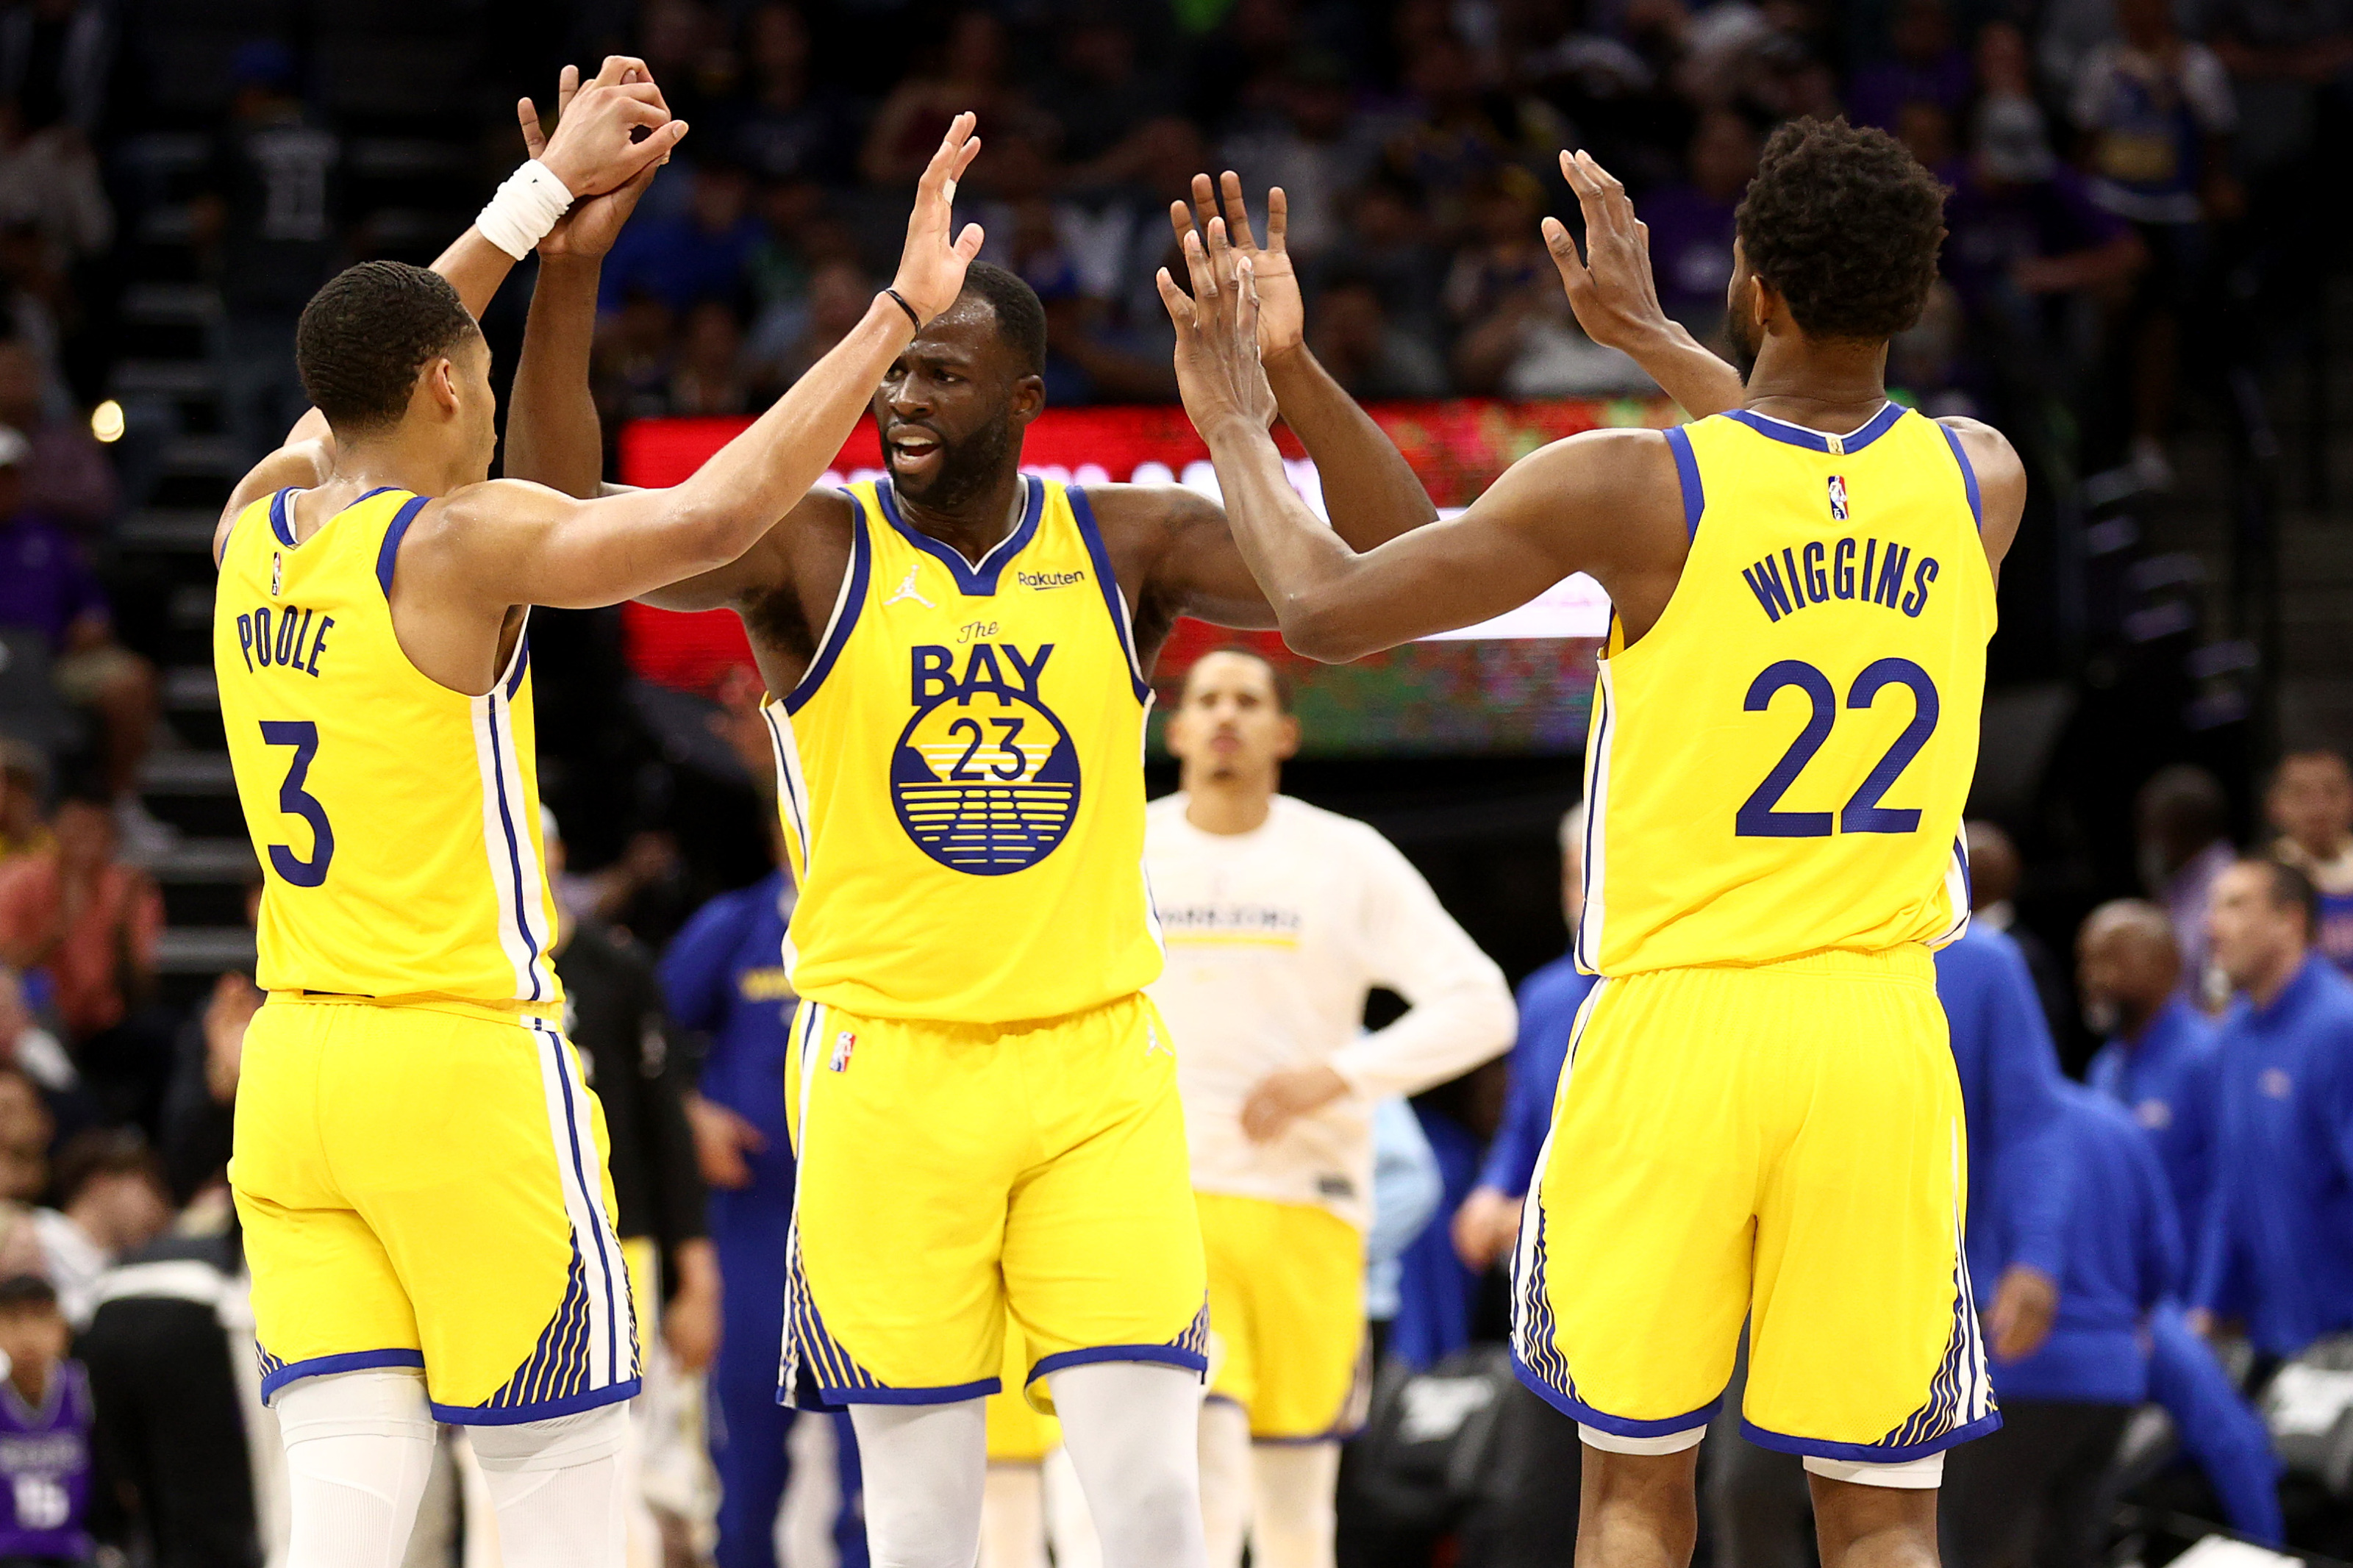 SACRAMENTO, CALIFORNIA - APRIL 03:  Jordan Poole #3, Draymond Green #23 and Andrew Wiggins #22 of the Golden State Warriors high five after the Warriors scored a basket against the Sacramento Kings in the second half at Golden 1 Center on April 03, 2022 in Sacramento, California. NOTE TO USER: User expressly acknowledges and agrees that, by downloading and/or using this photograph, User is consenting to the terms and conditions of the Getty Images License Agreement.  (Photo by Ezra Shaw/Getty Images)